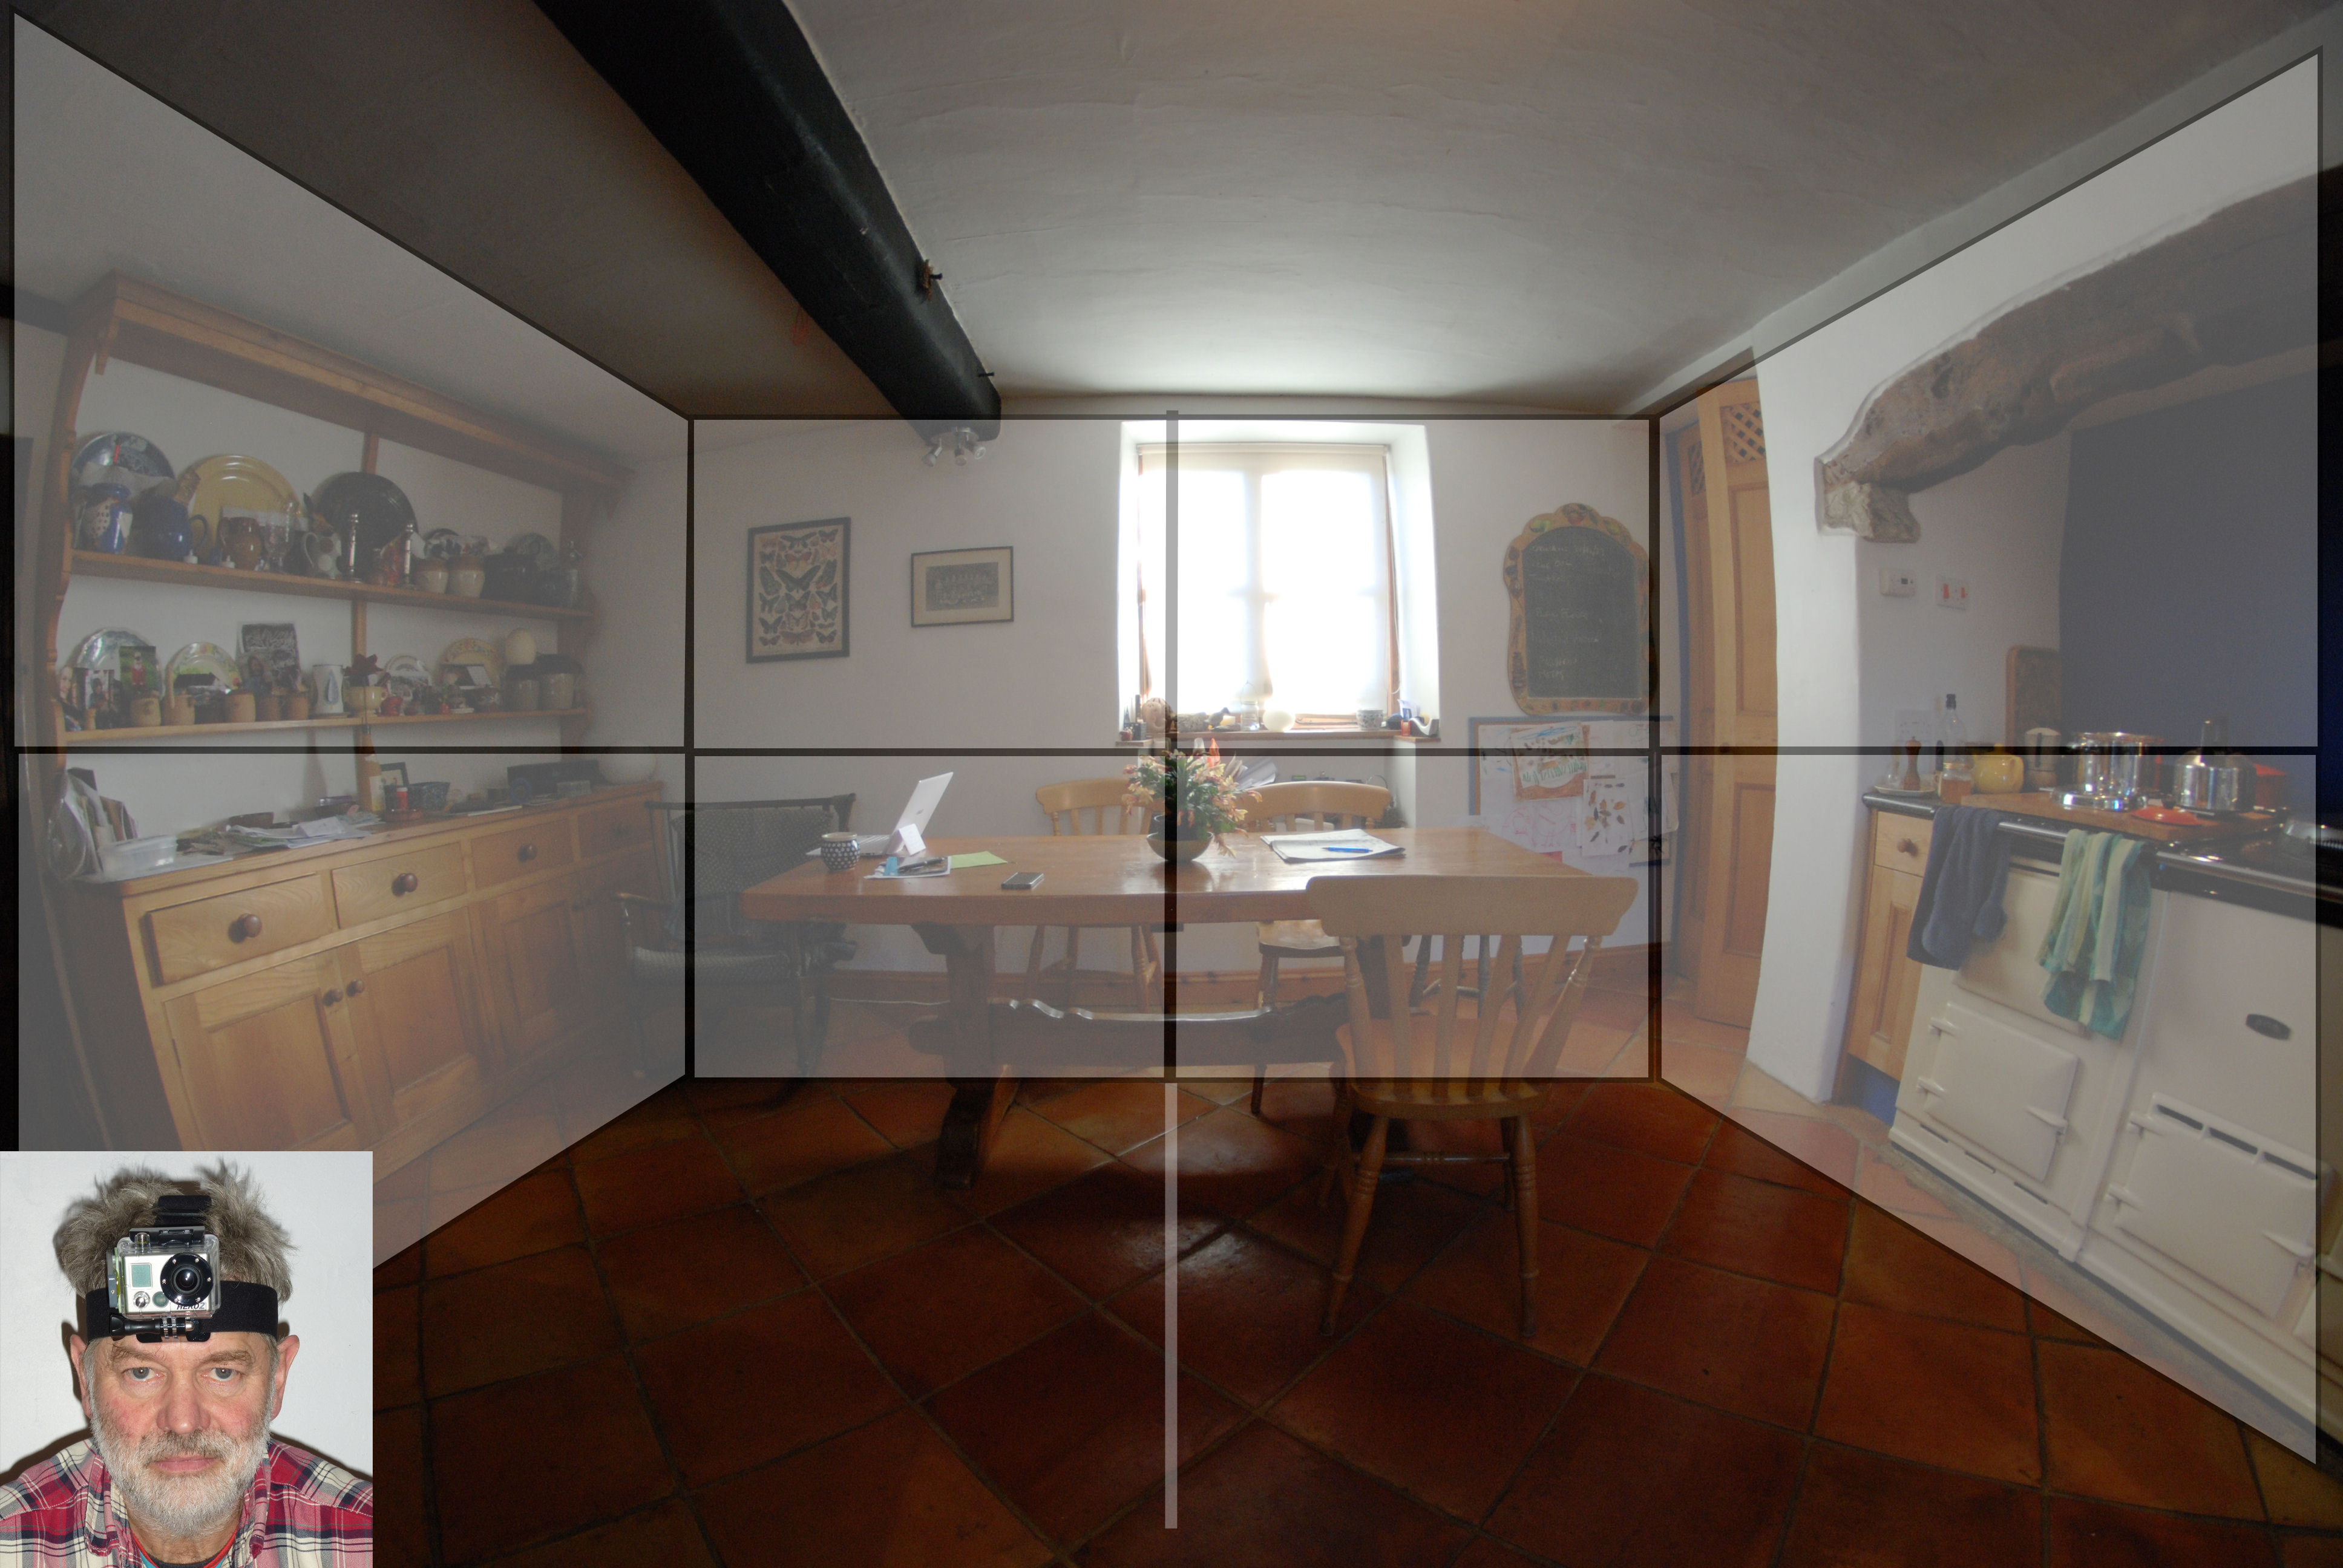 fig1 Kitchen view with inset.jpg